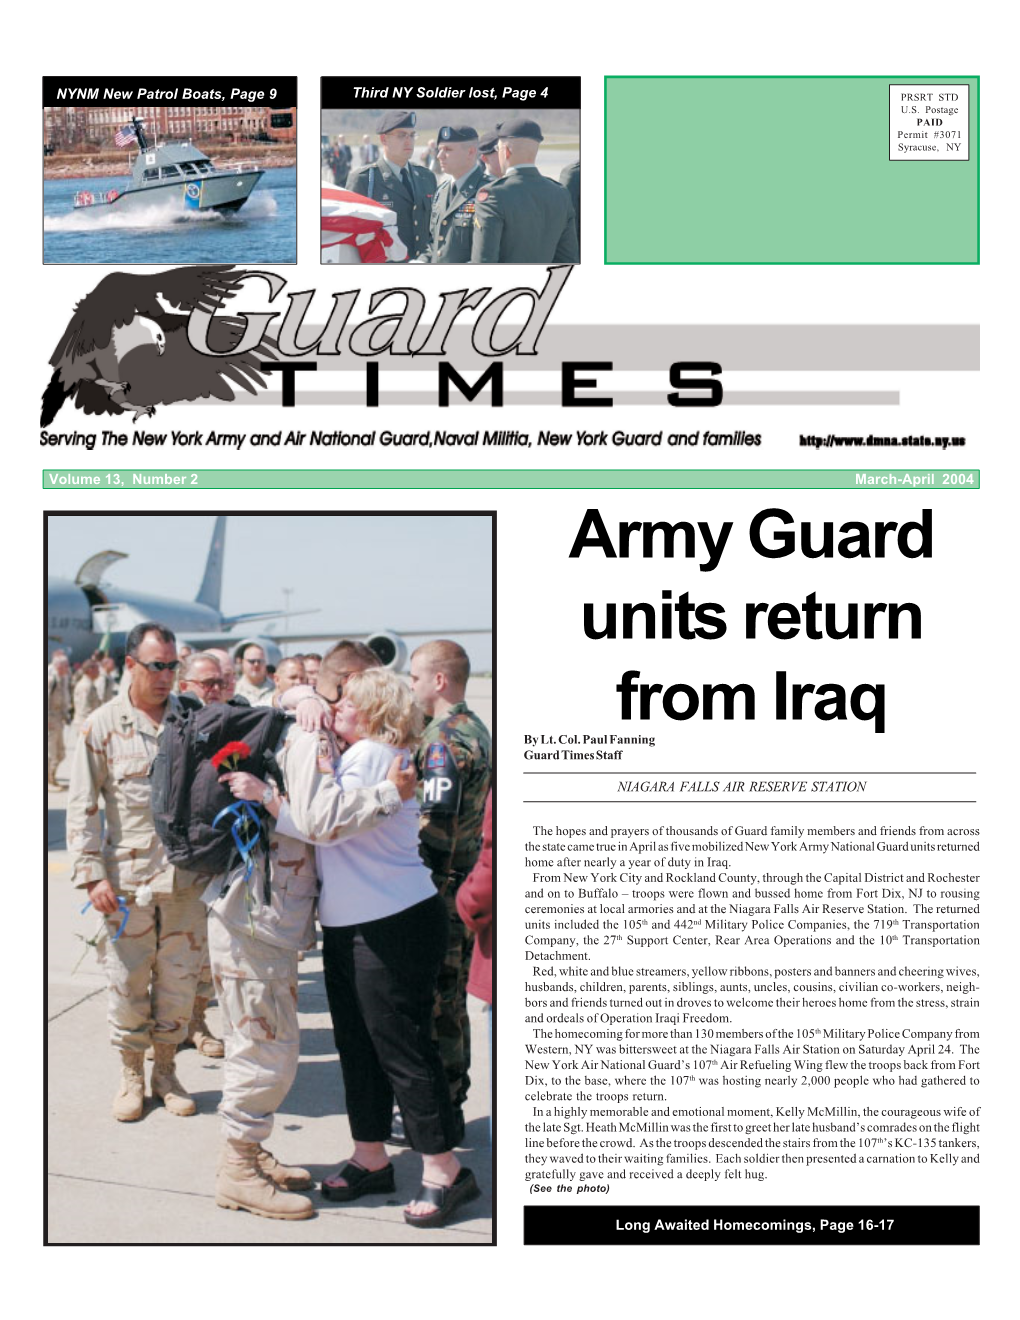 March-April 2004 Army Guard Units Return from Iraq by Lt